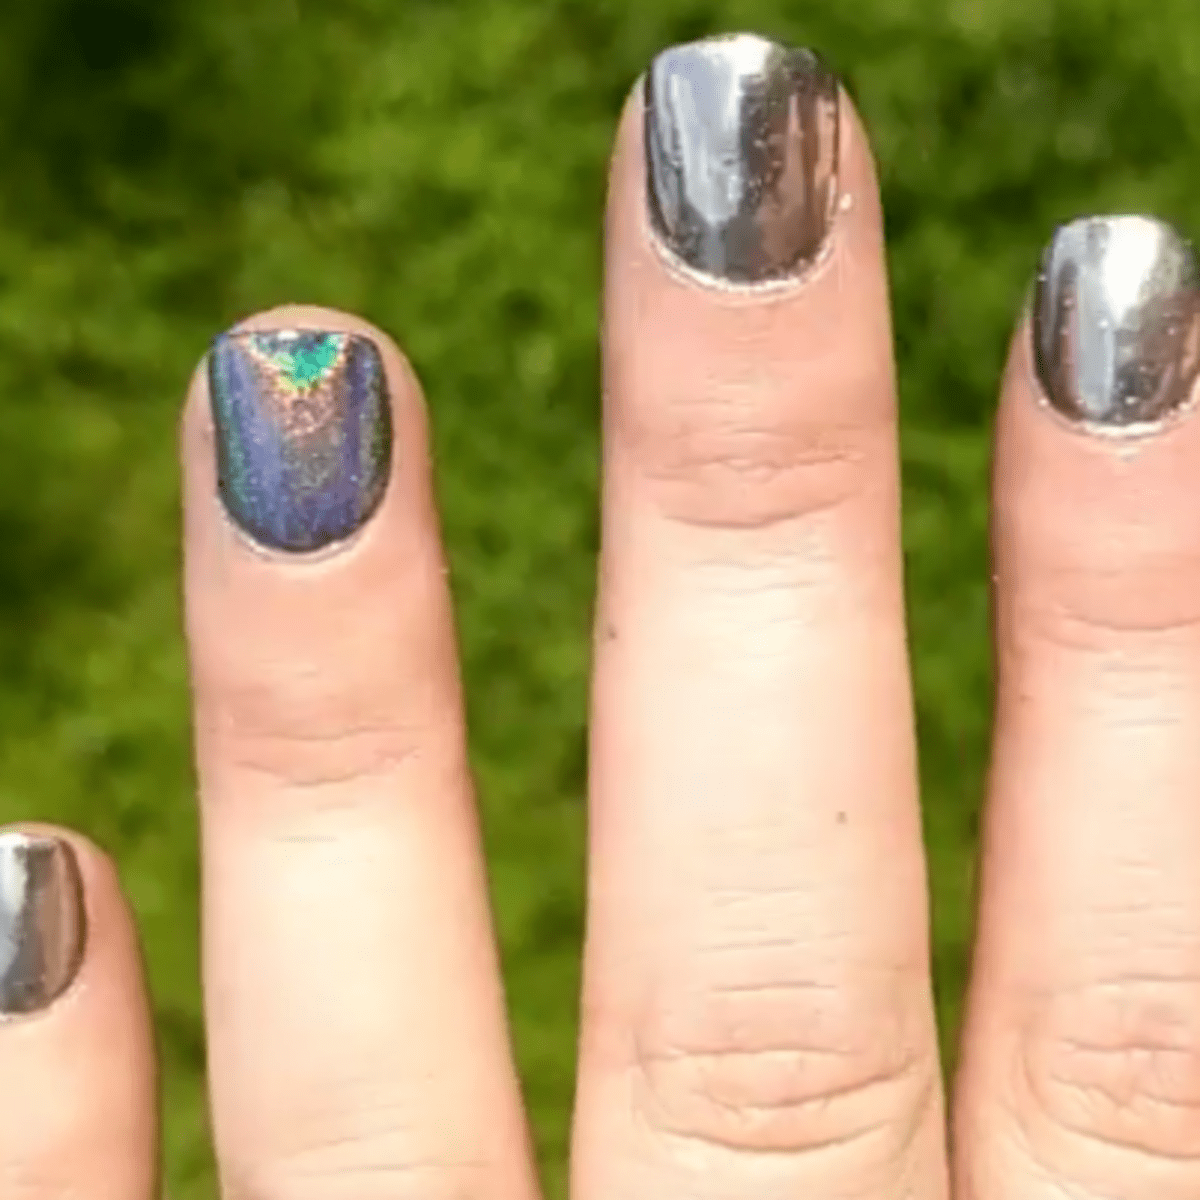 How to Do Holographic Nail Art | POPSUGAR Beauty